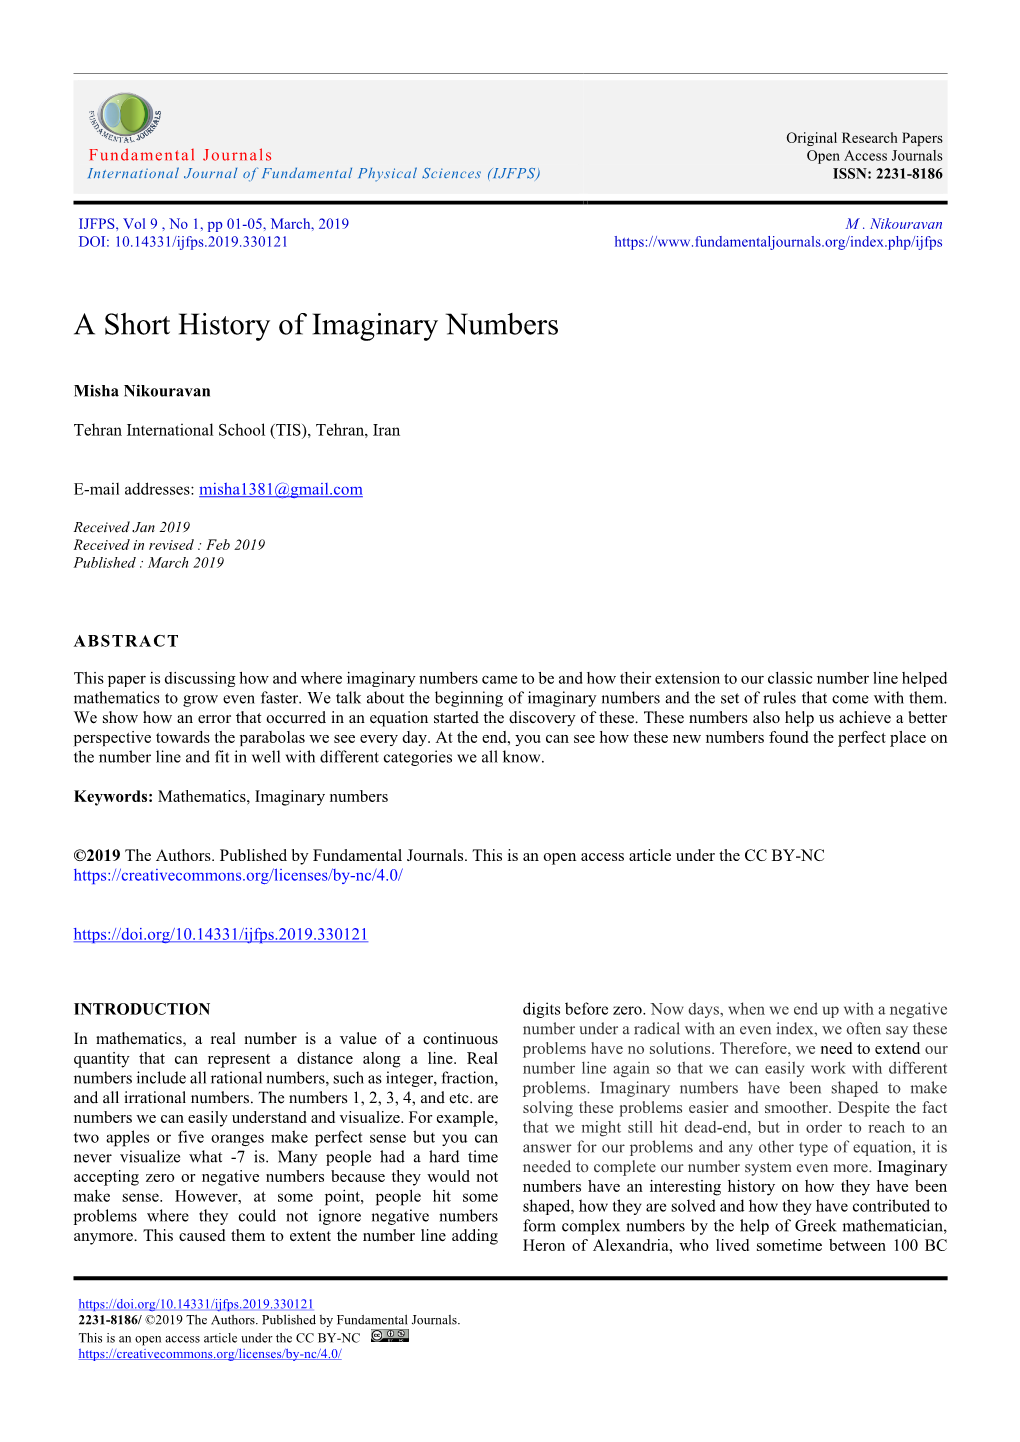 A Short History of Imaginary Numbers